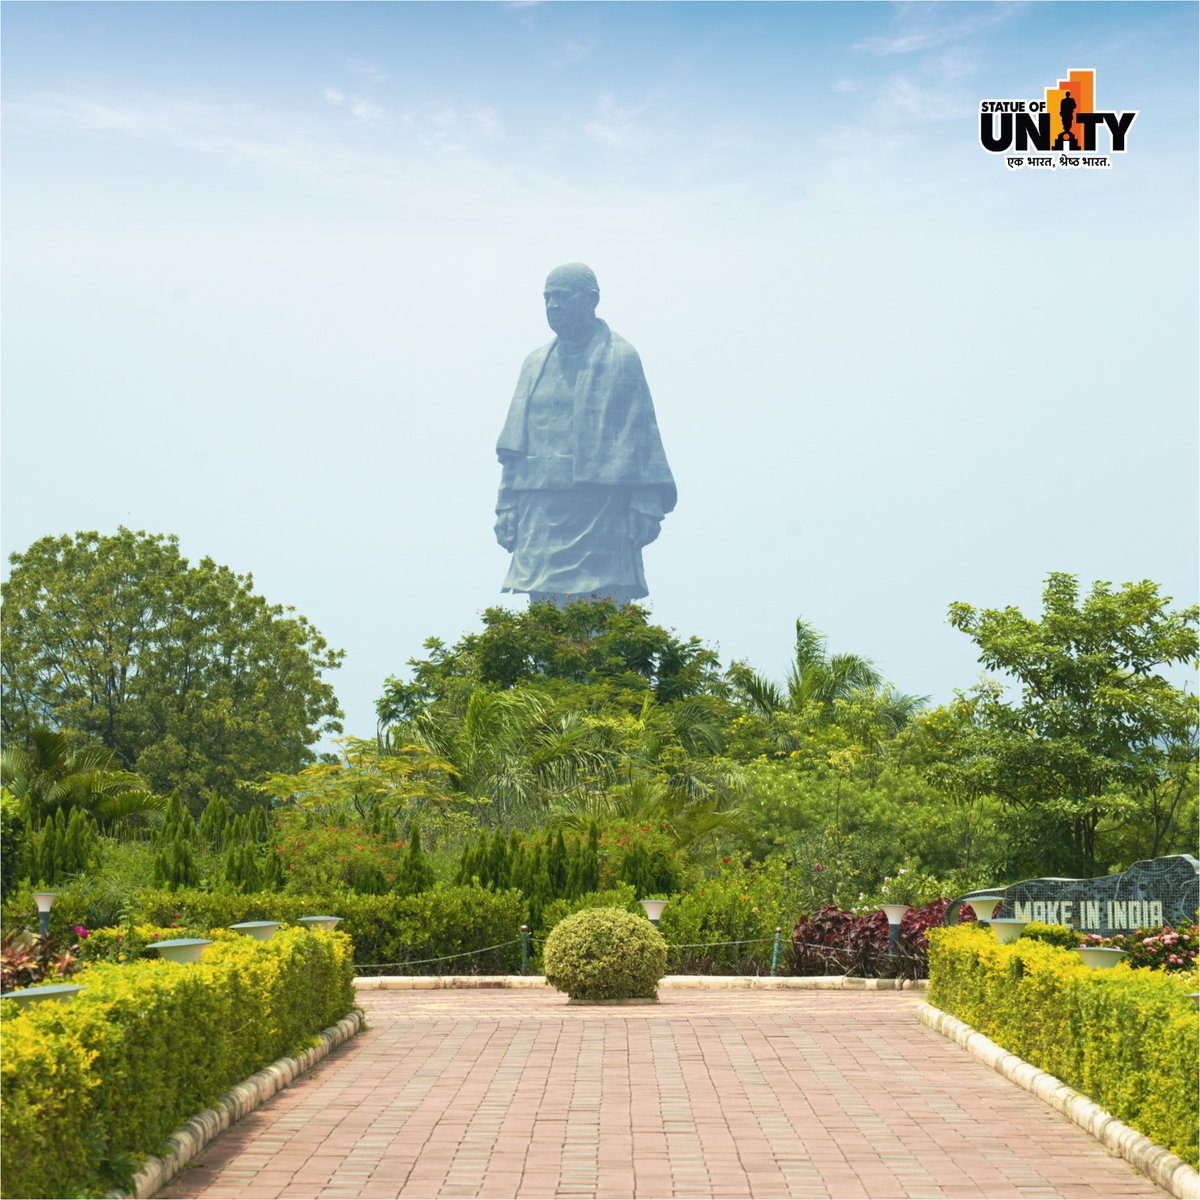 Uncover the hidden beauty of the #ValleyOfFlowers at the majestic #StatueOfUnity. 

Come immerse yourself in nature's breathtaking colors and tranquility at #EktaNagar where every petal tells a story.
@MukeshPuri26 @udit_ias @agnee_cool